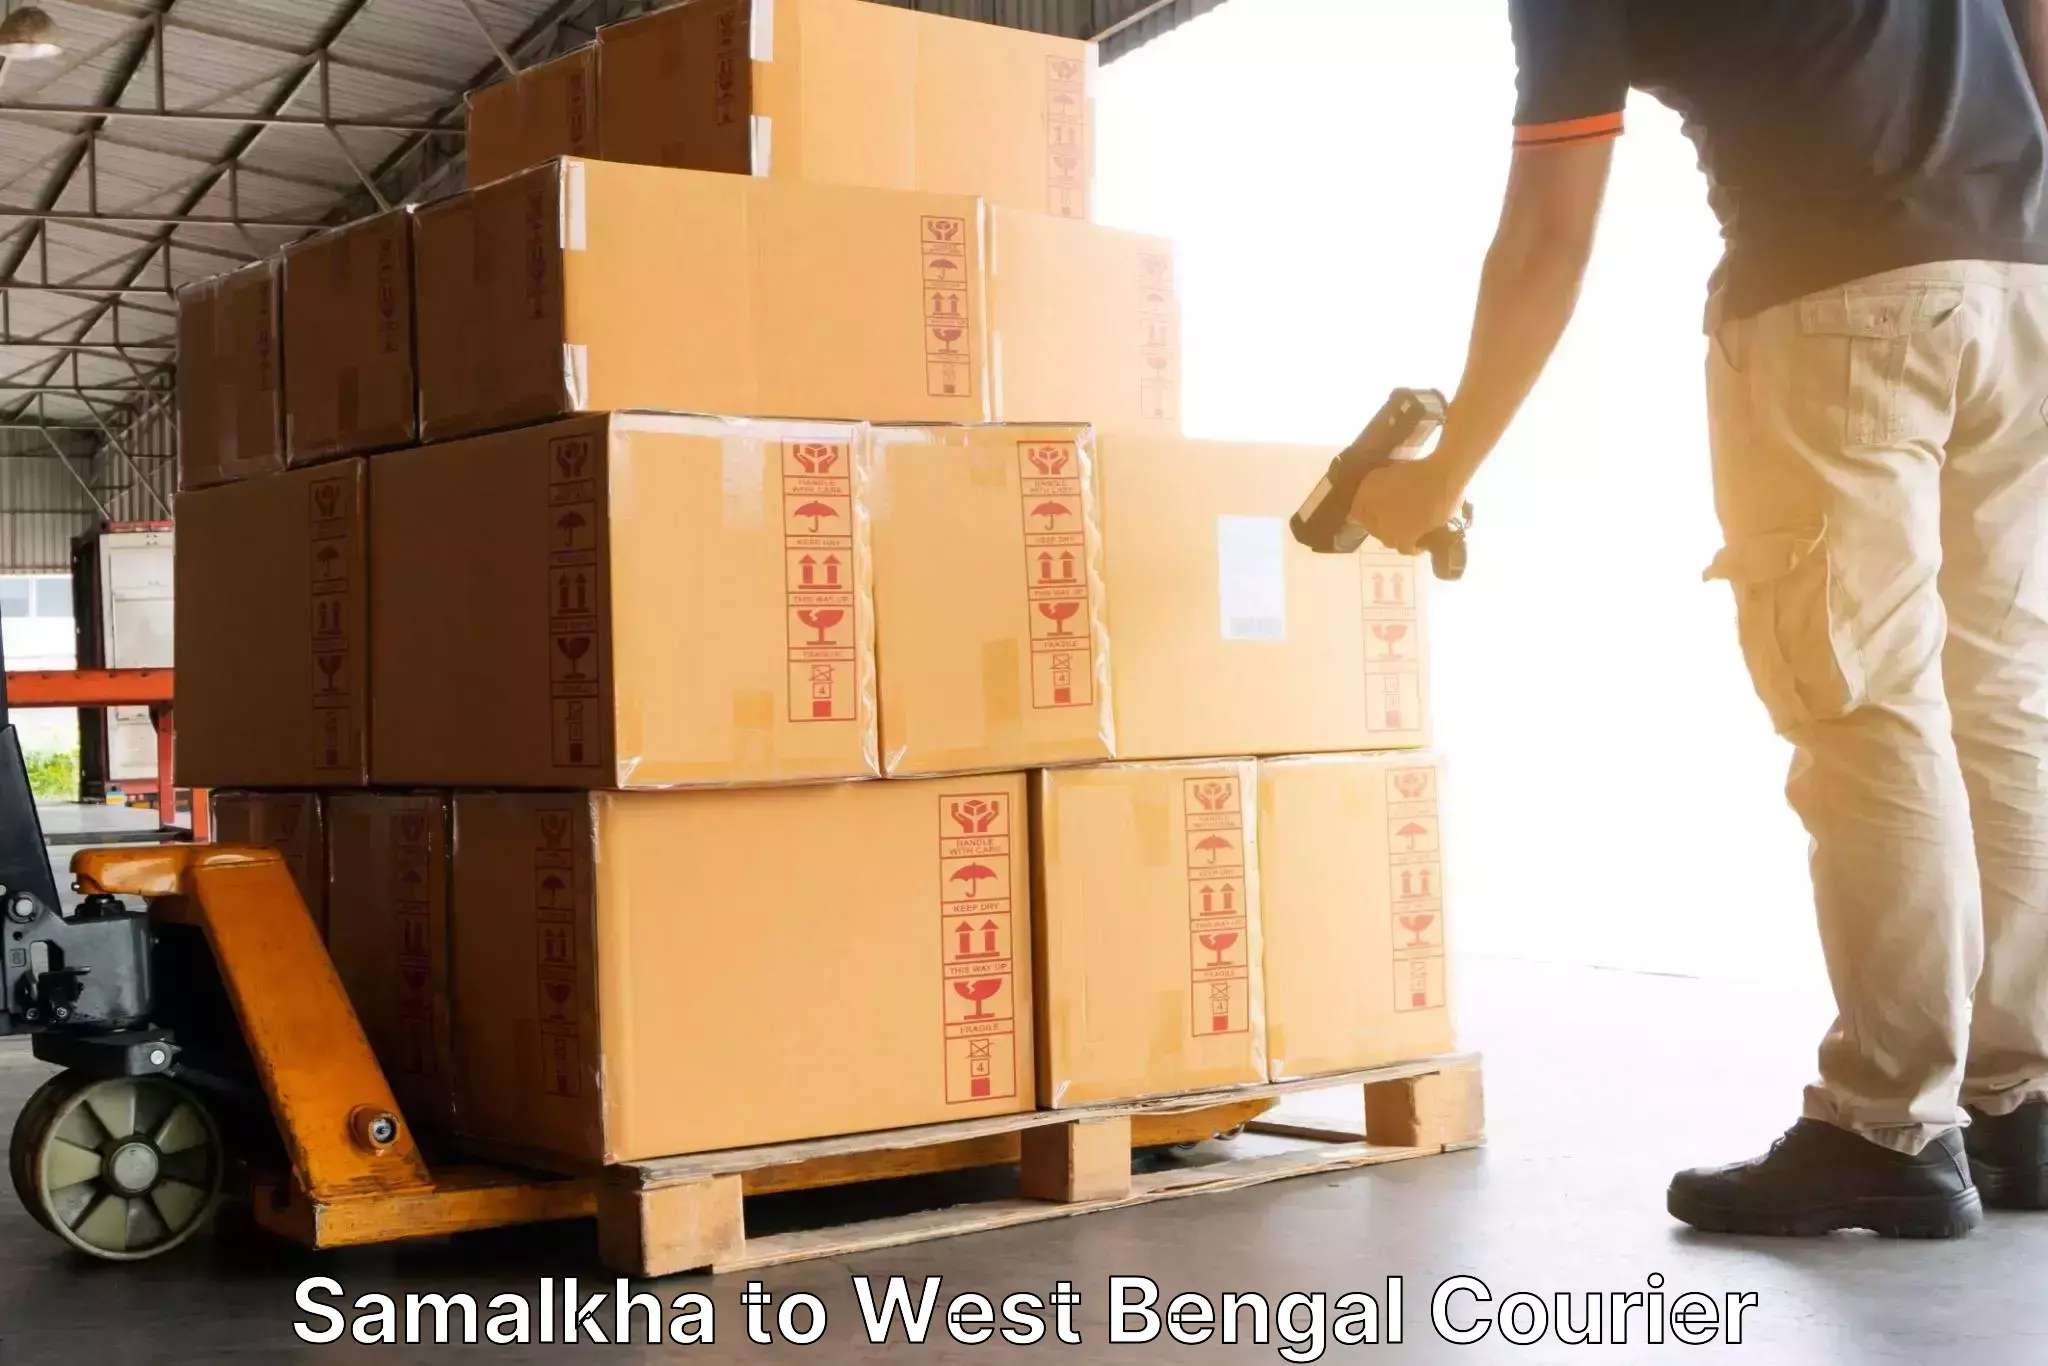 Courier service booking in Samalkha to Ennore